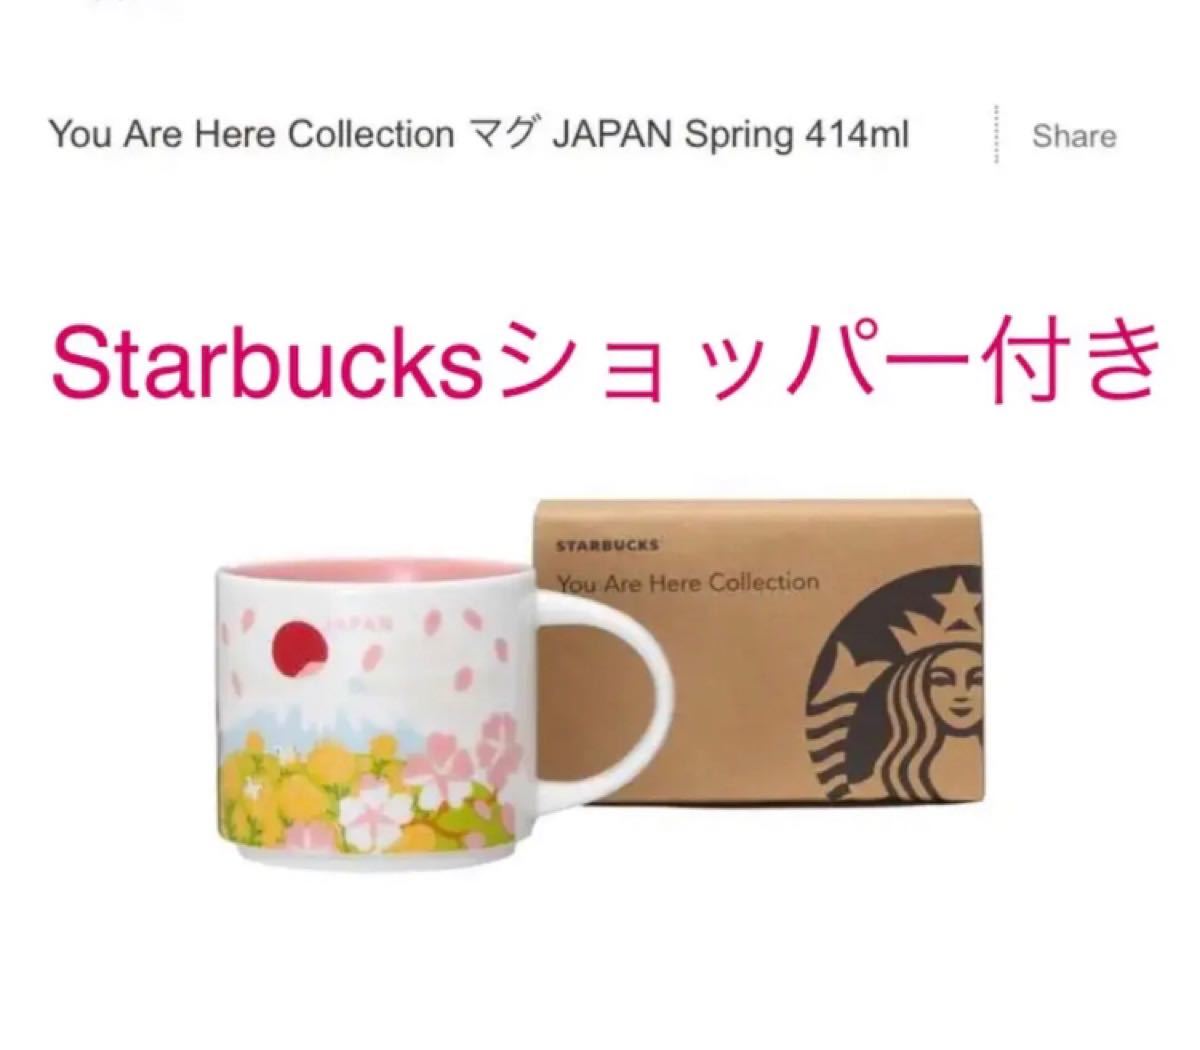 Paypayフリマ スタバ You Are Here Collection マグ マグカップ 春 スターバックス Japan 日本 限定